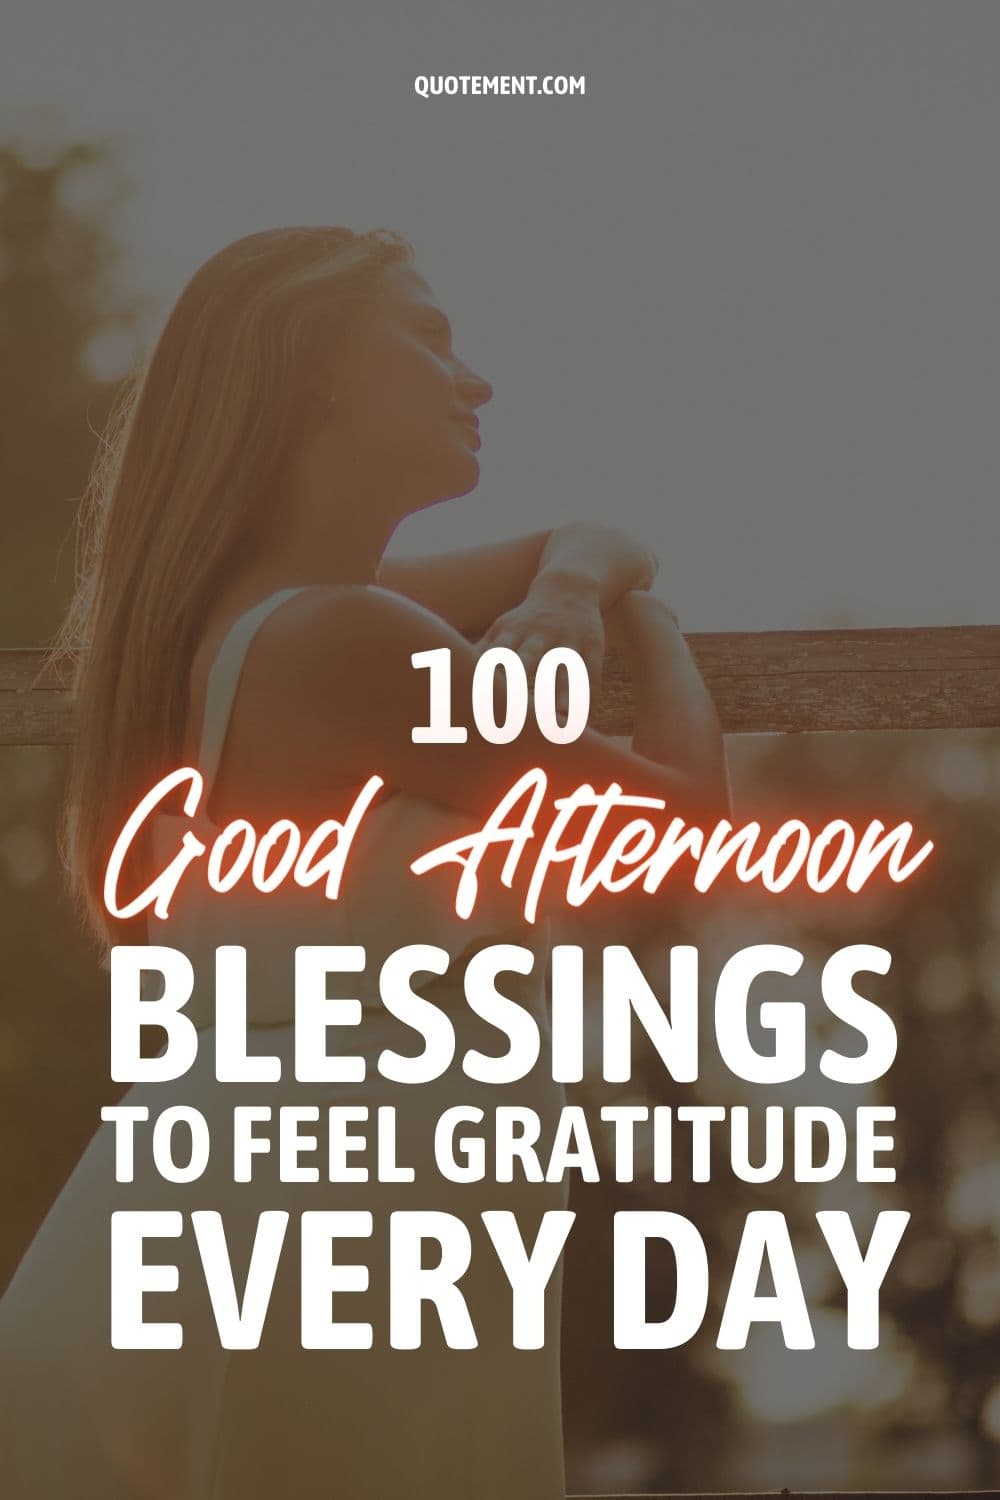 100 Good Afternoon Blessings To Feel Gratitude Every Day
